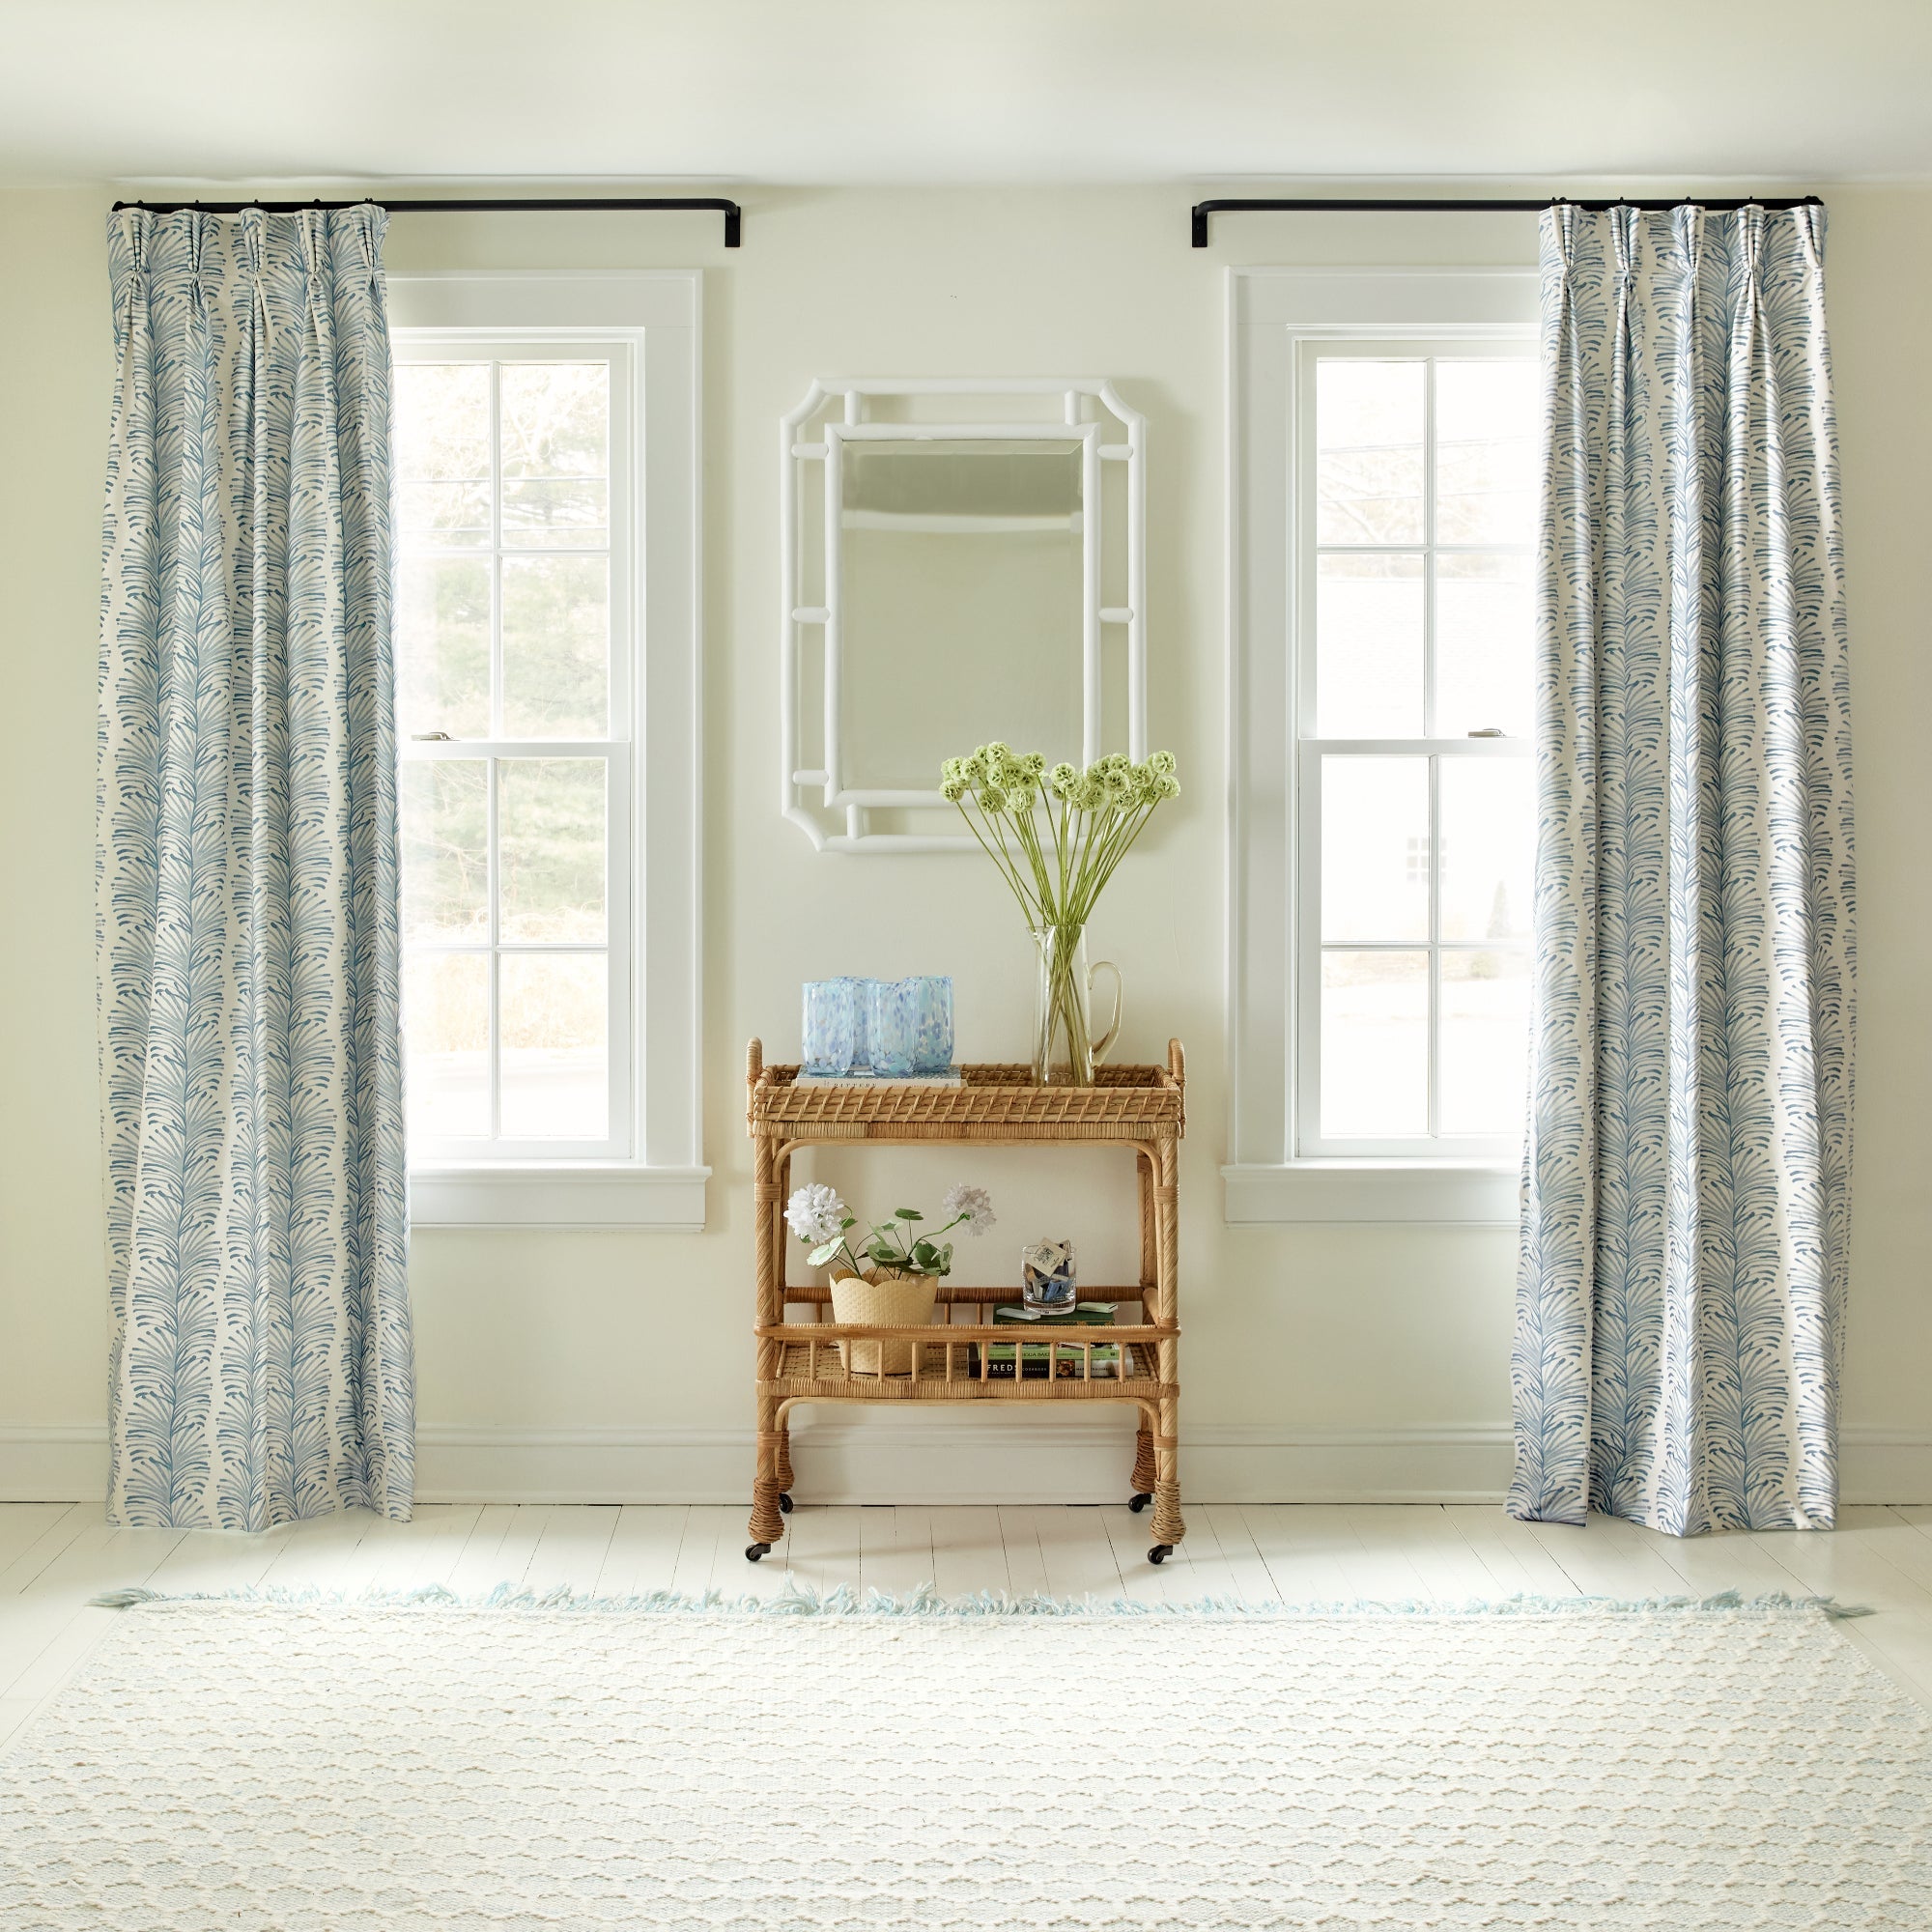 Windows styled with Sky Blue Botanical Stripe Printed Curtains and brown cart in the middle with green flowers in vase on top and white mirror on wall in between windows